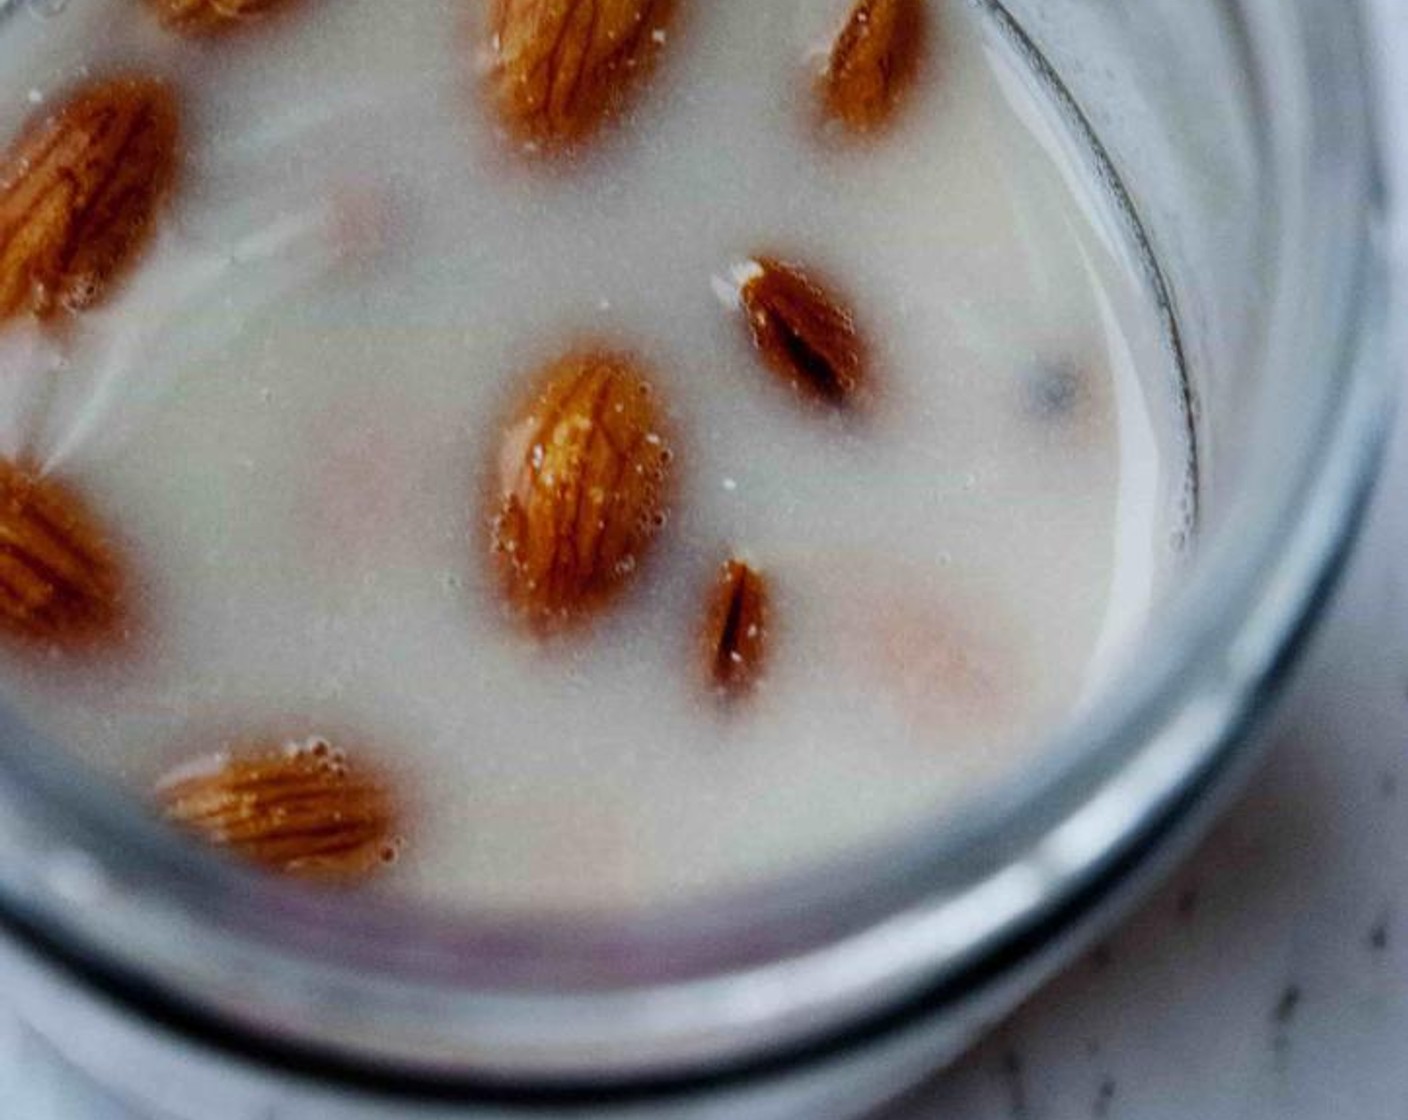 step 1 Take some Live Kefir Grains (2 Tbsp). Wash the Raw Almonds (1 cup) and place them in a jar with the Water (3/4 cup) and kefir. Give it a stir.